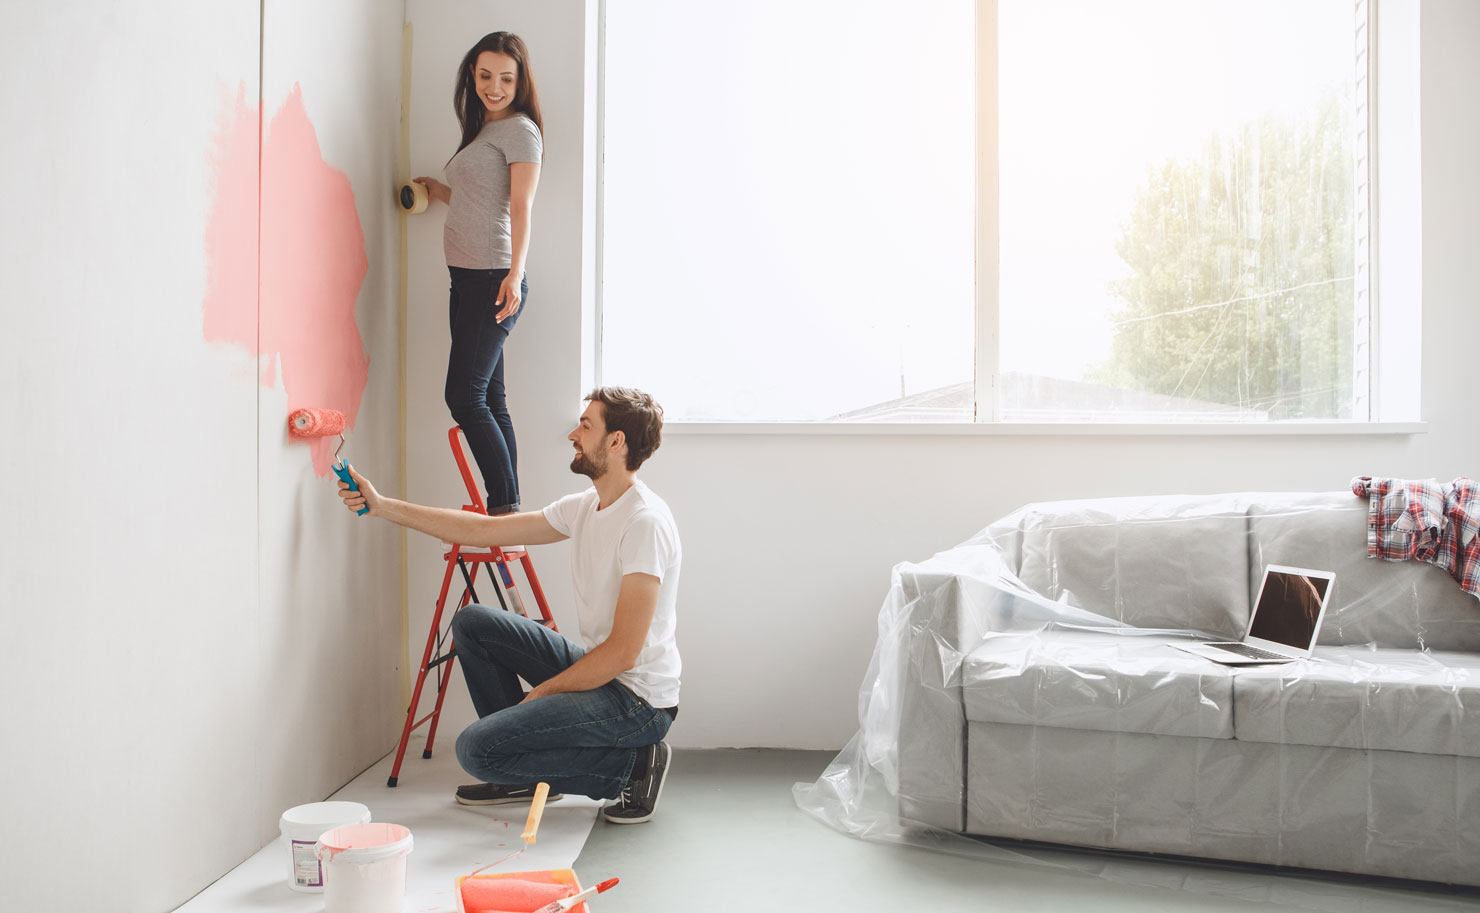 What Kind Of Preparation Is Required Before Painting Your Home